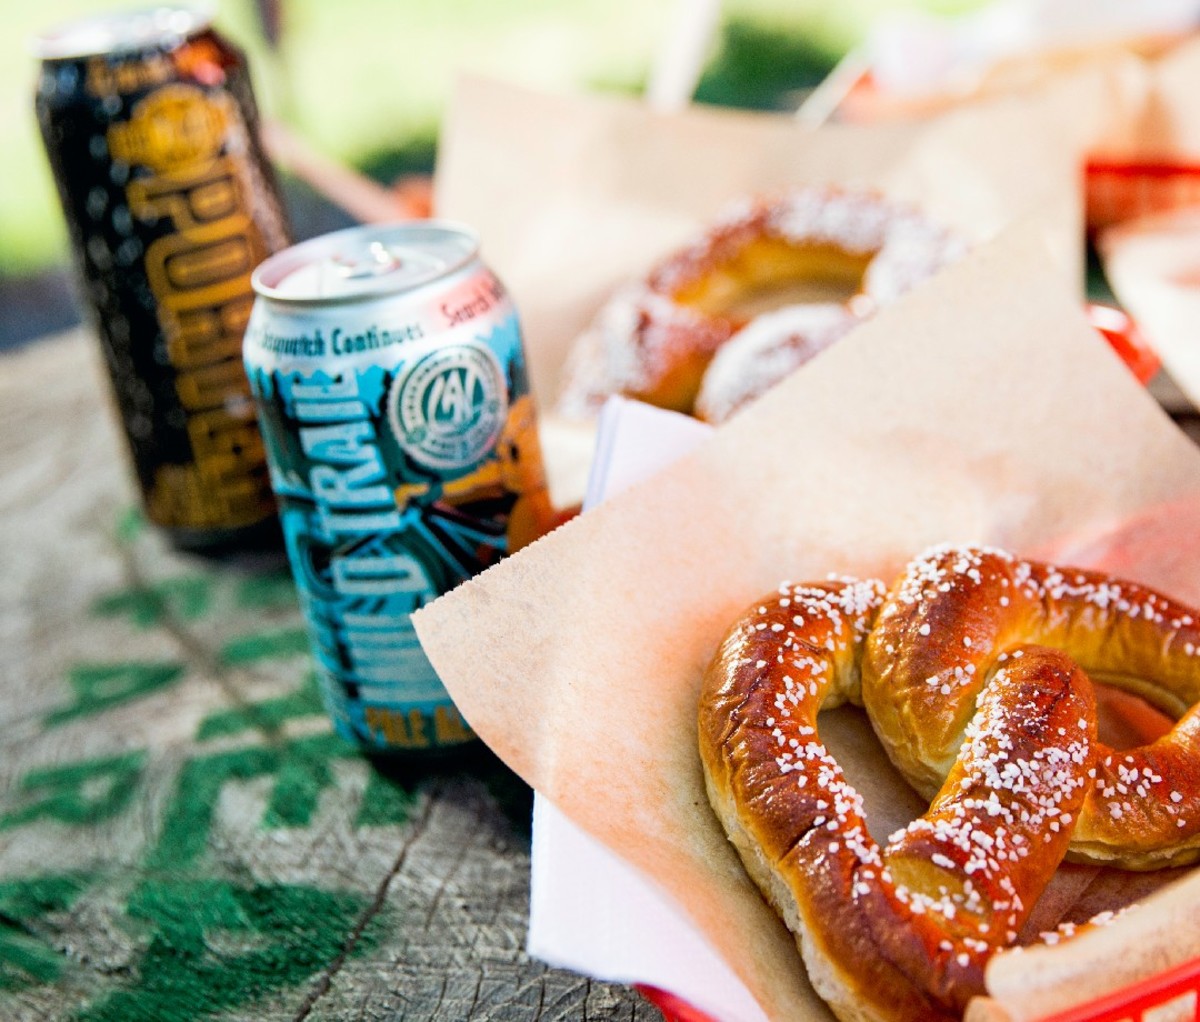 Can of Greenbrier Valley Brewing Co.'s Wild Trail Pail Ale beer next to a salted pretzel